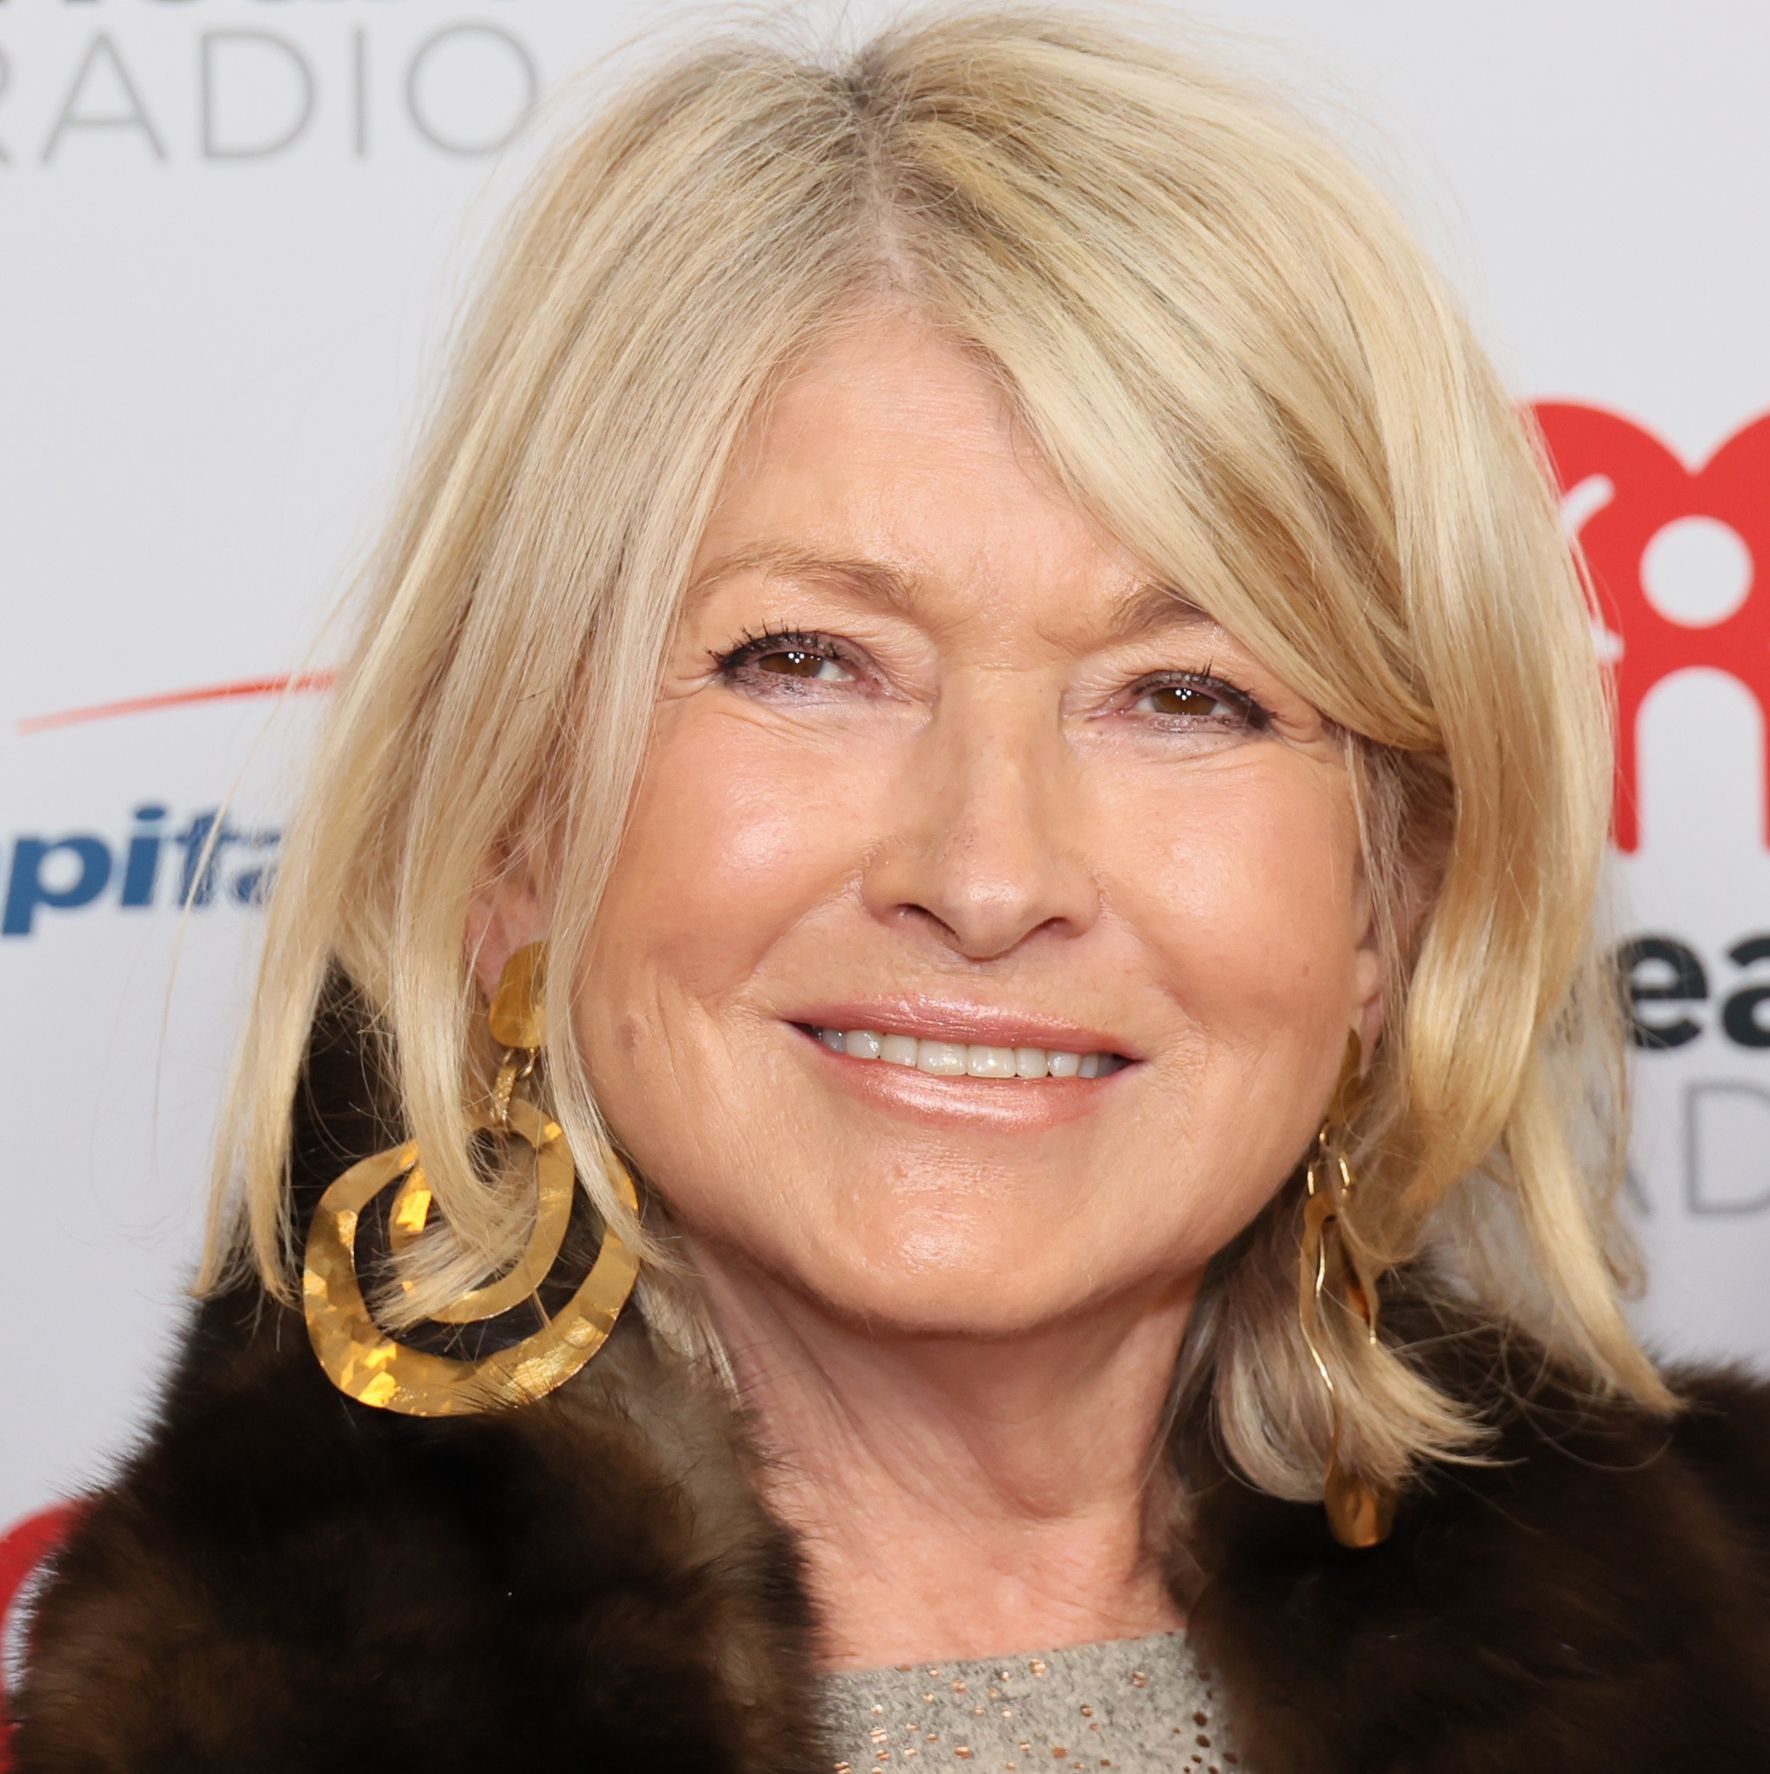 Martha Stewart Shares the Serum She Says Keeps Her Skin Looking ‘Really Good’ at 81